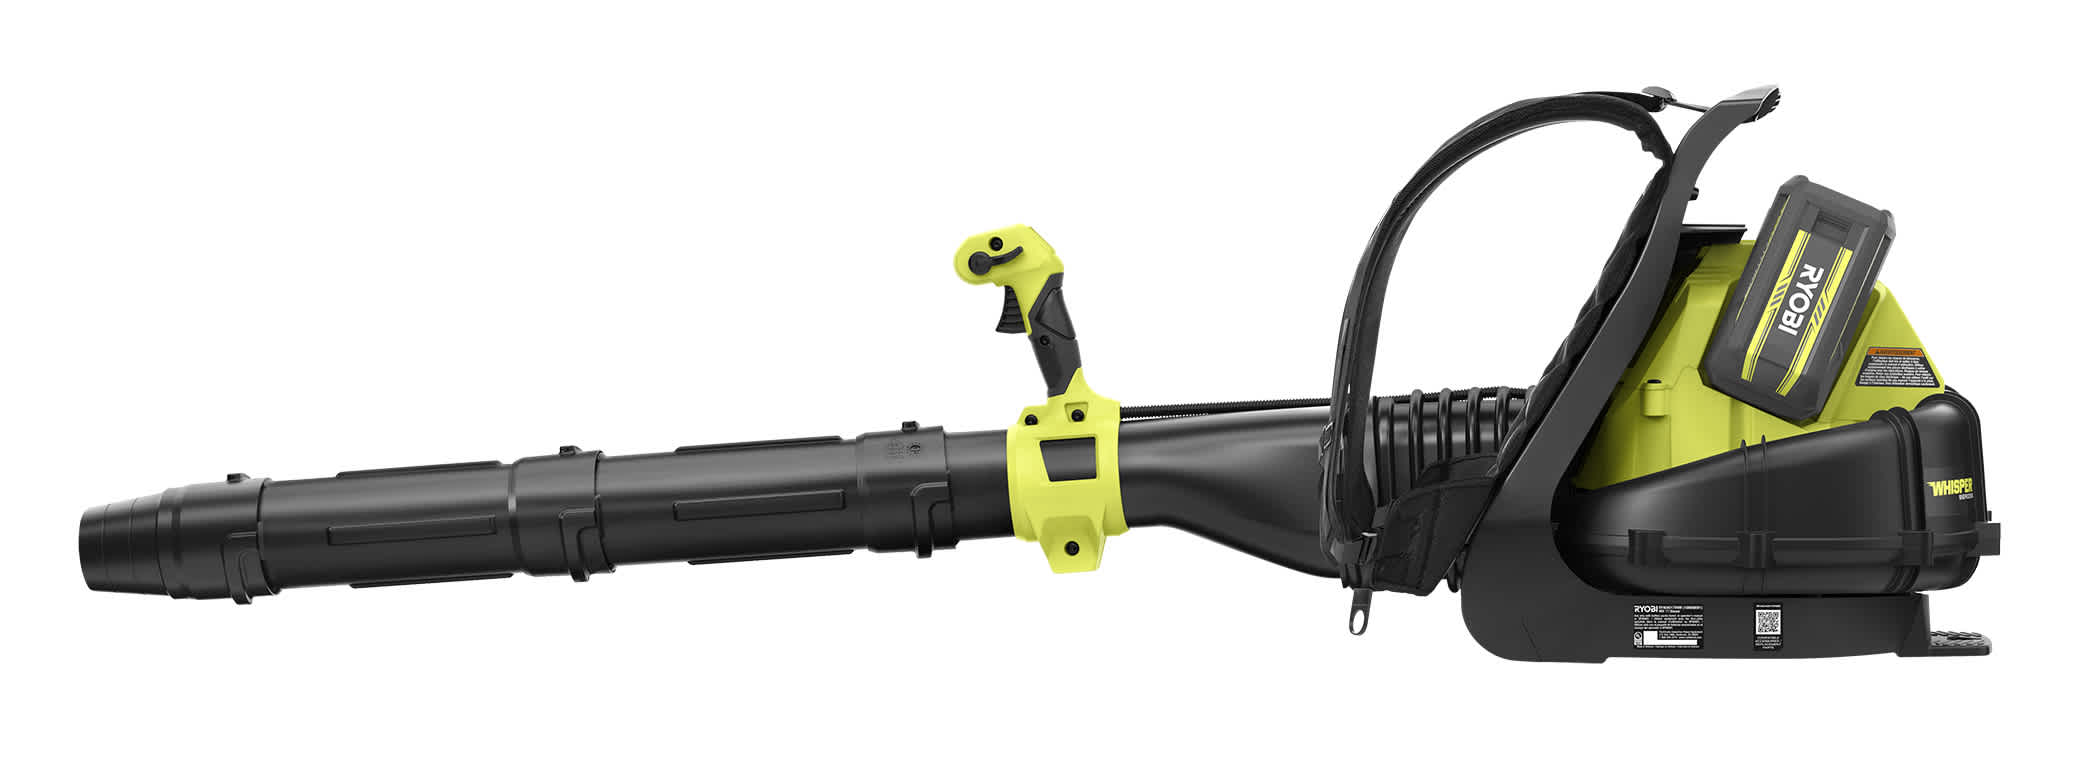 Product Features Image for 40V HP BRUSHLESS 730 CFM WHISPER SERIES BACKPACK BLOWER.